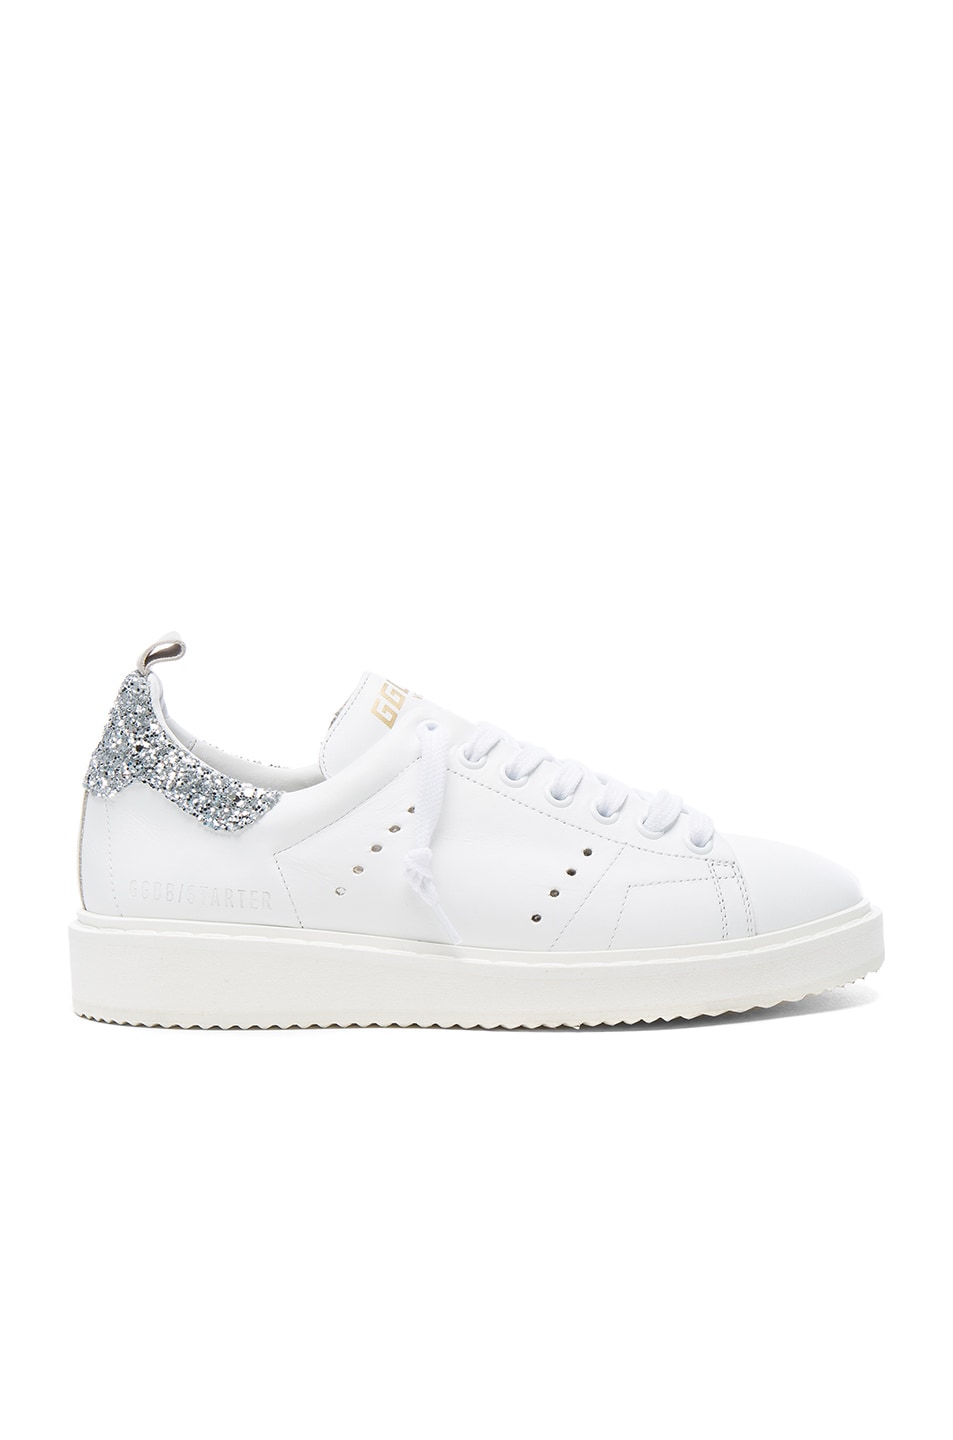 Image 1 of Golden Goose Leather Starter Sneakers in White & Silver Glitter